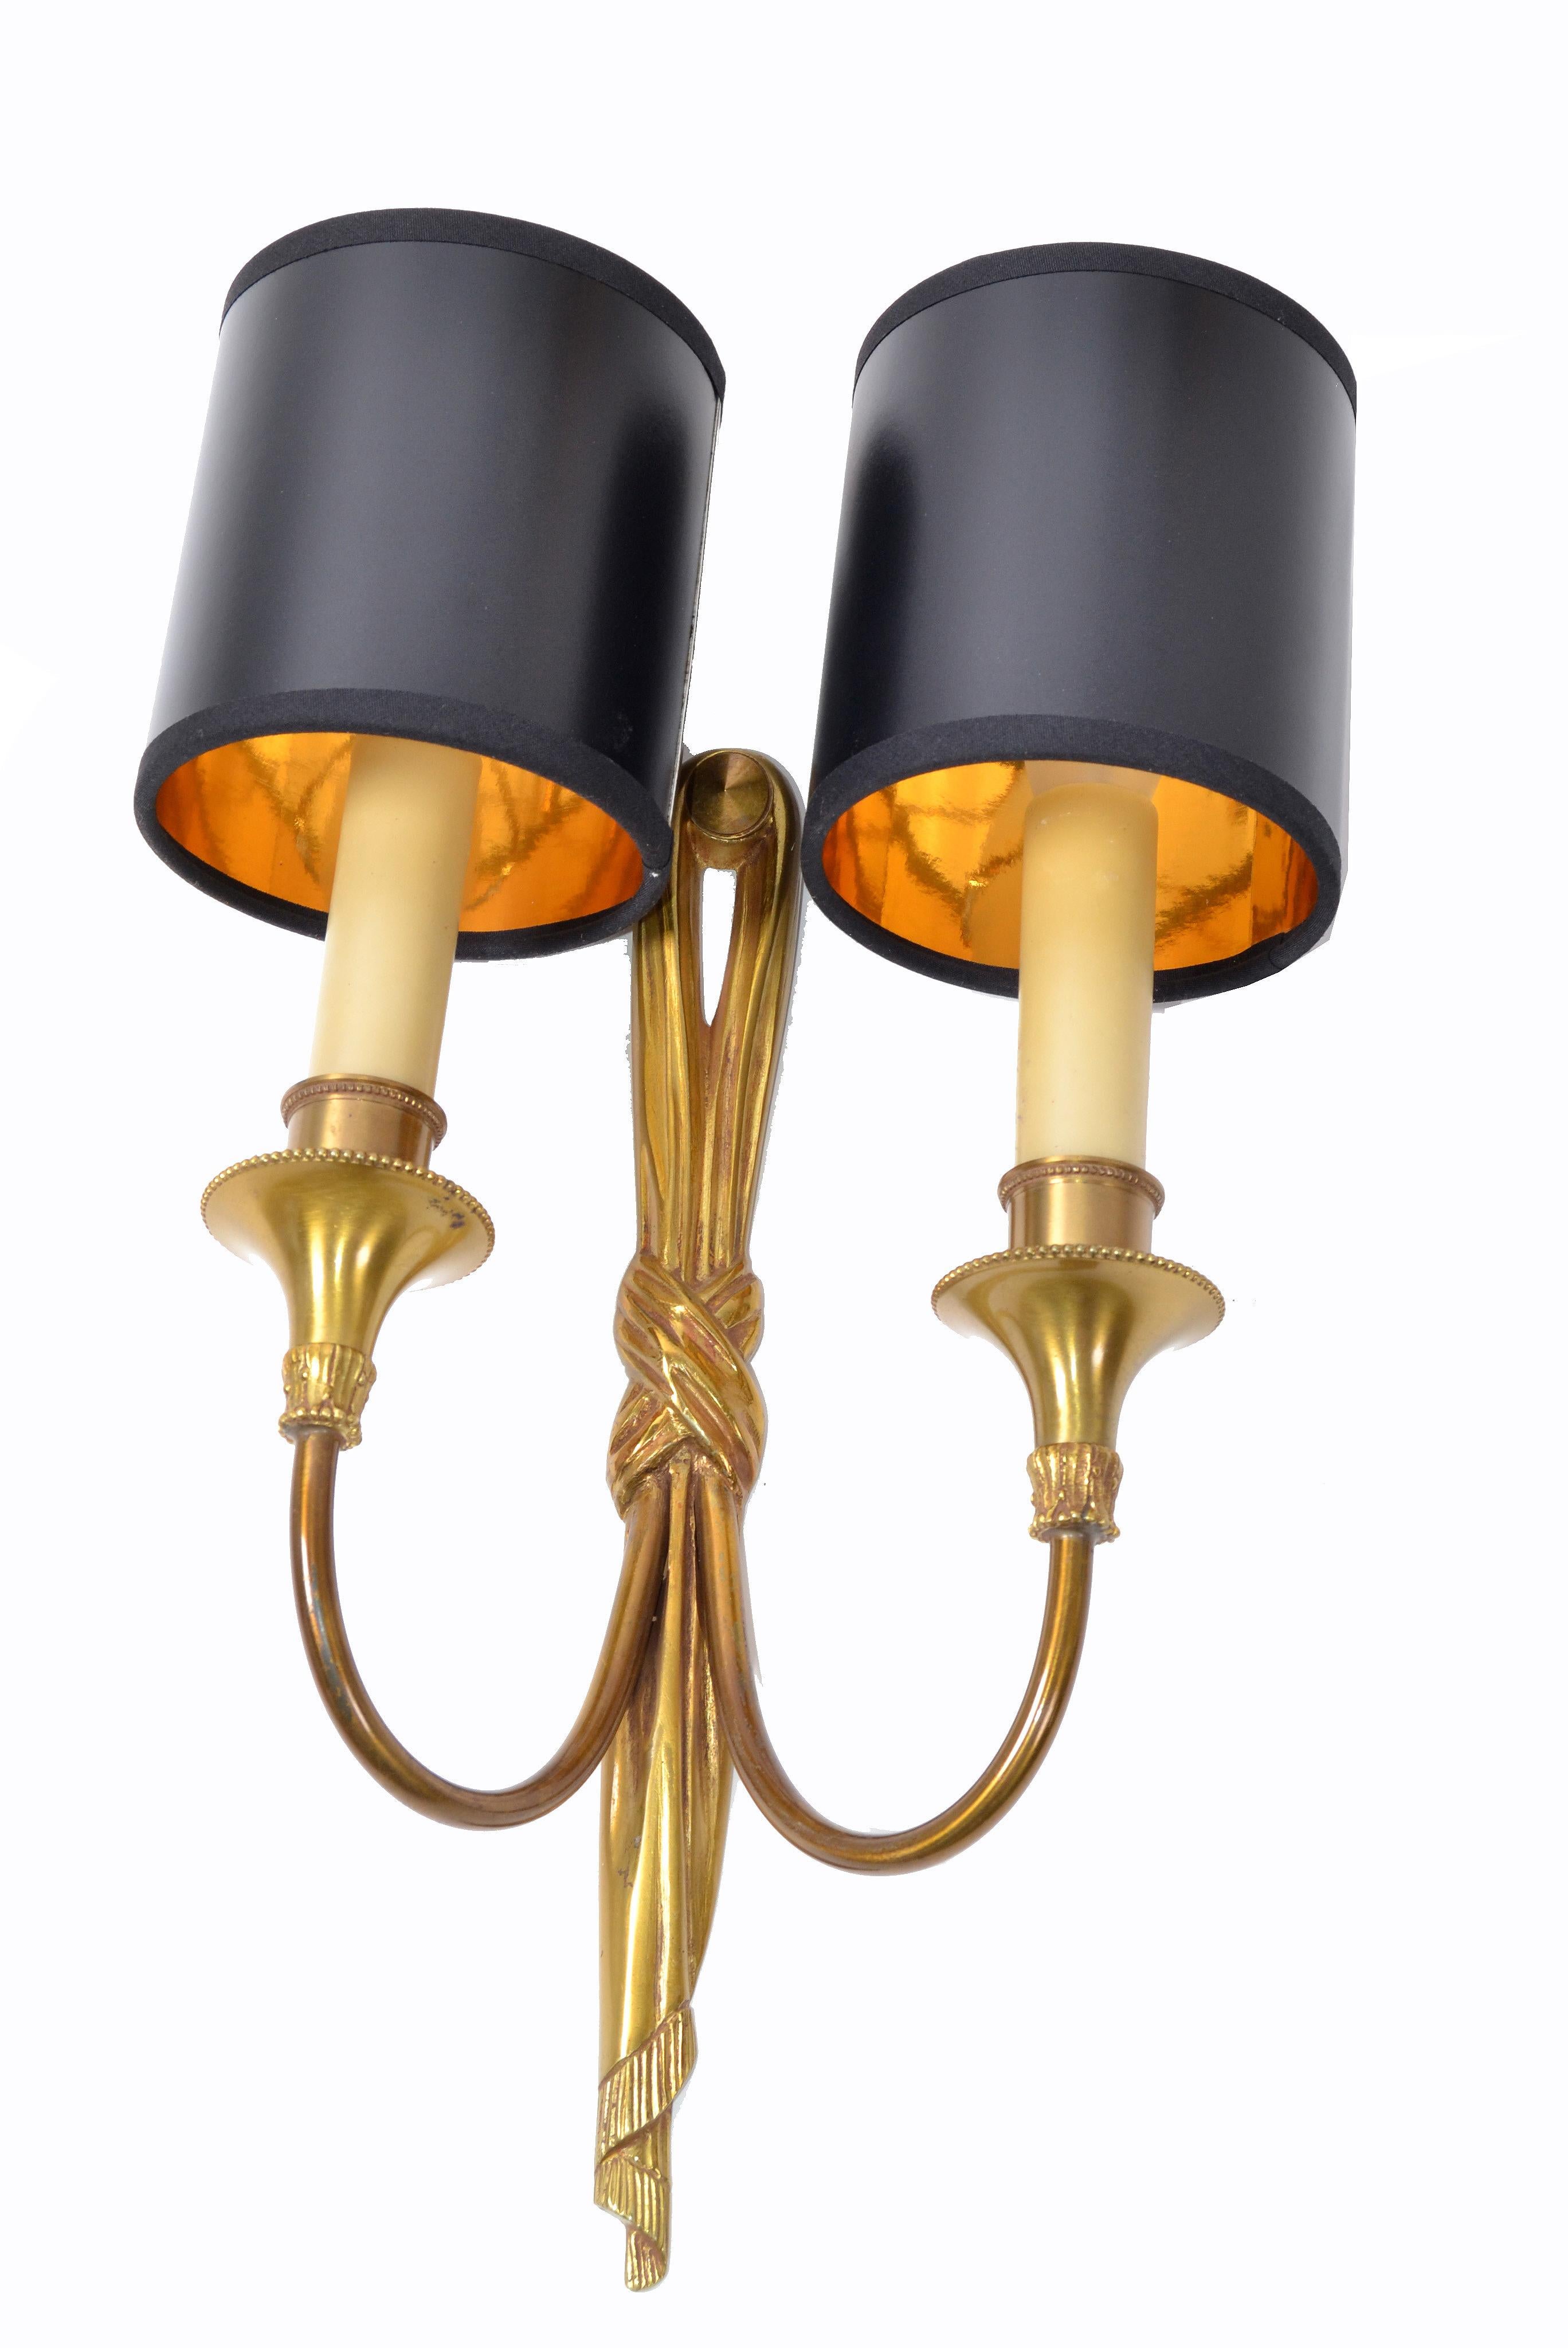 Hand-Crafted Maison Charles French Bronze Drapes Sconces France 1950s, 2 Pair Available